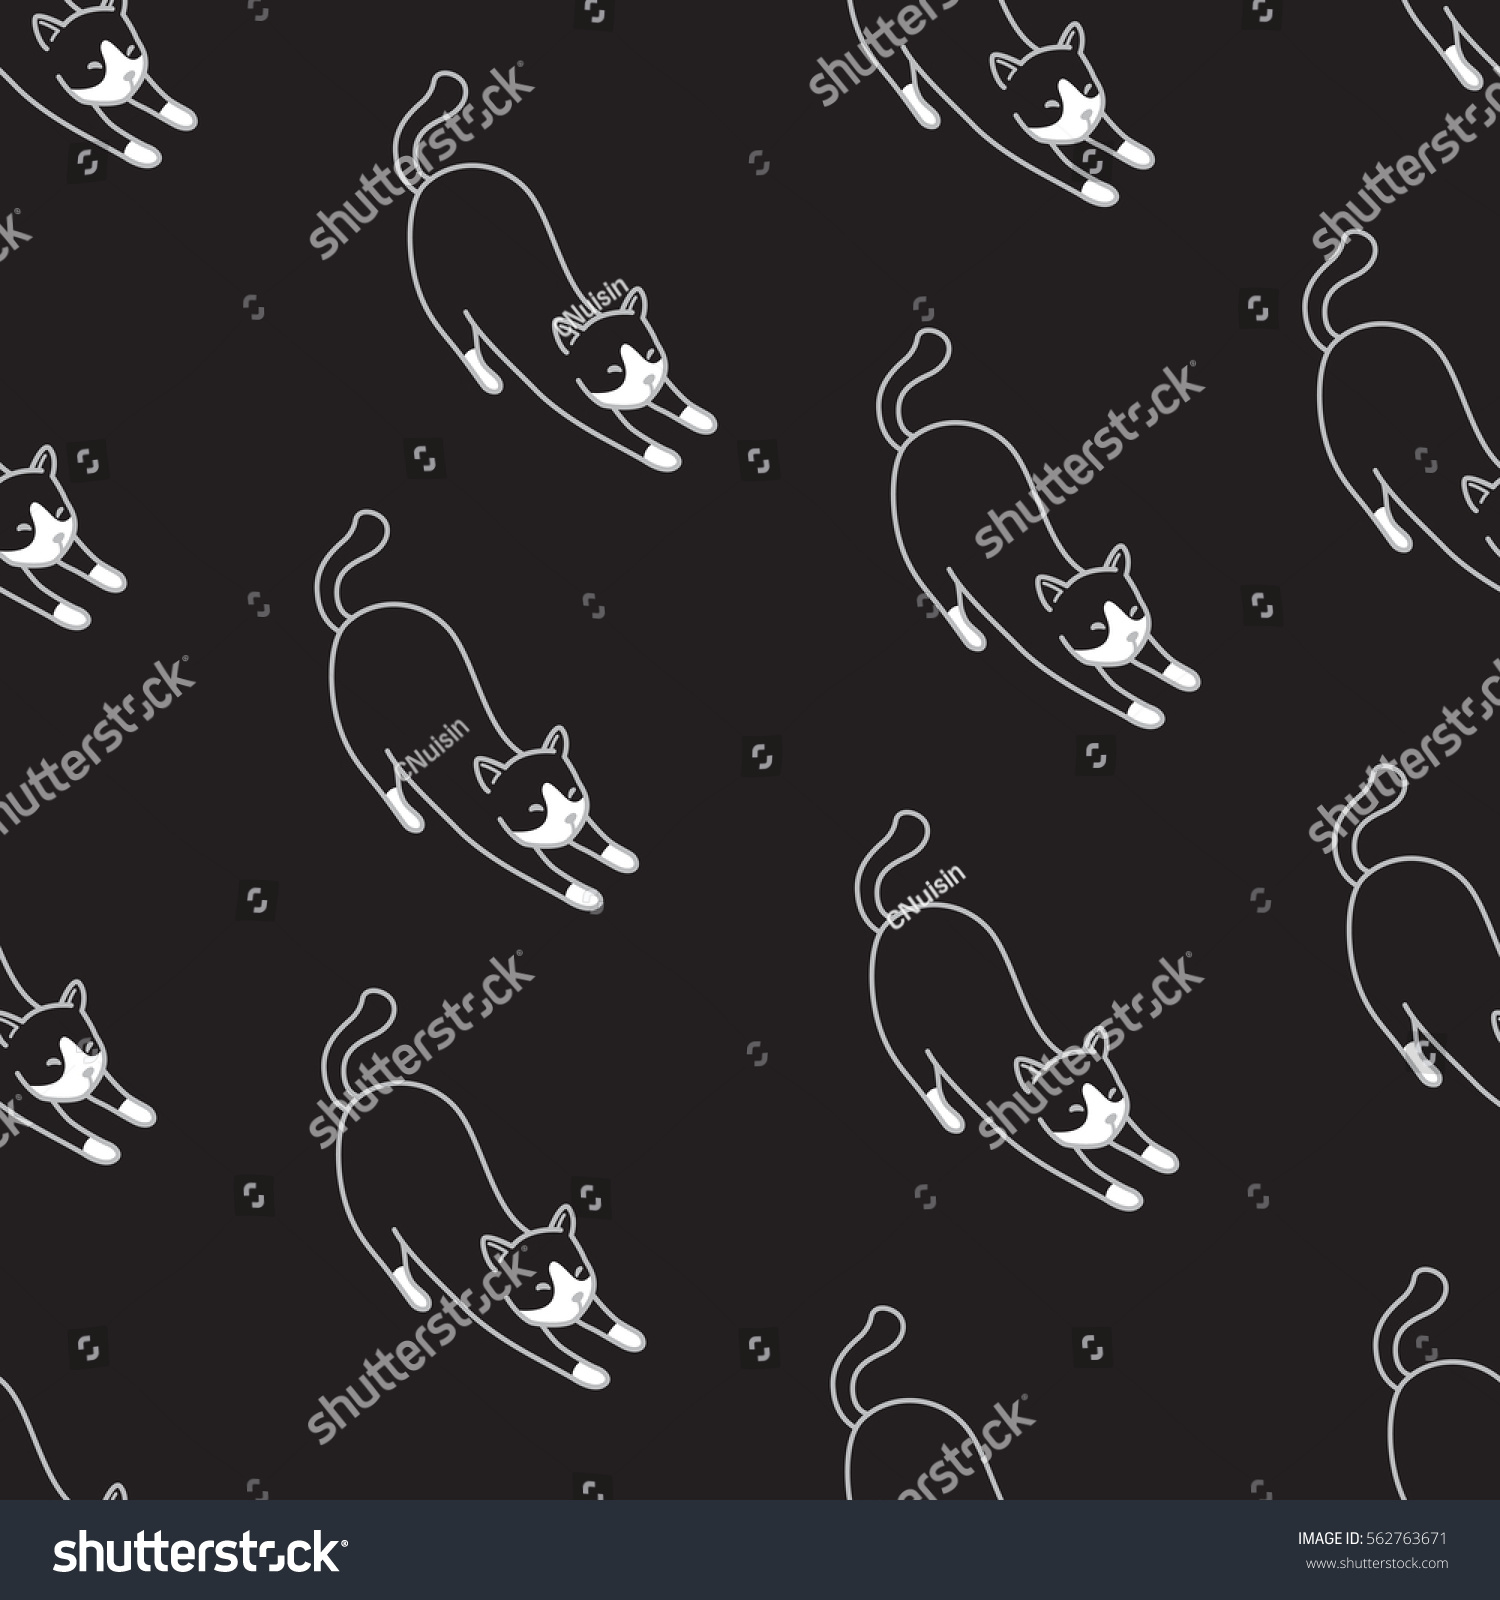 Cat Seamless Pattern Doodle Black Stock Vector (Royalty Free) 562763671 ...